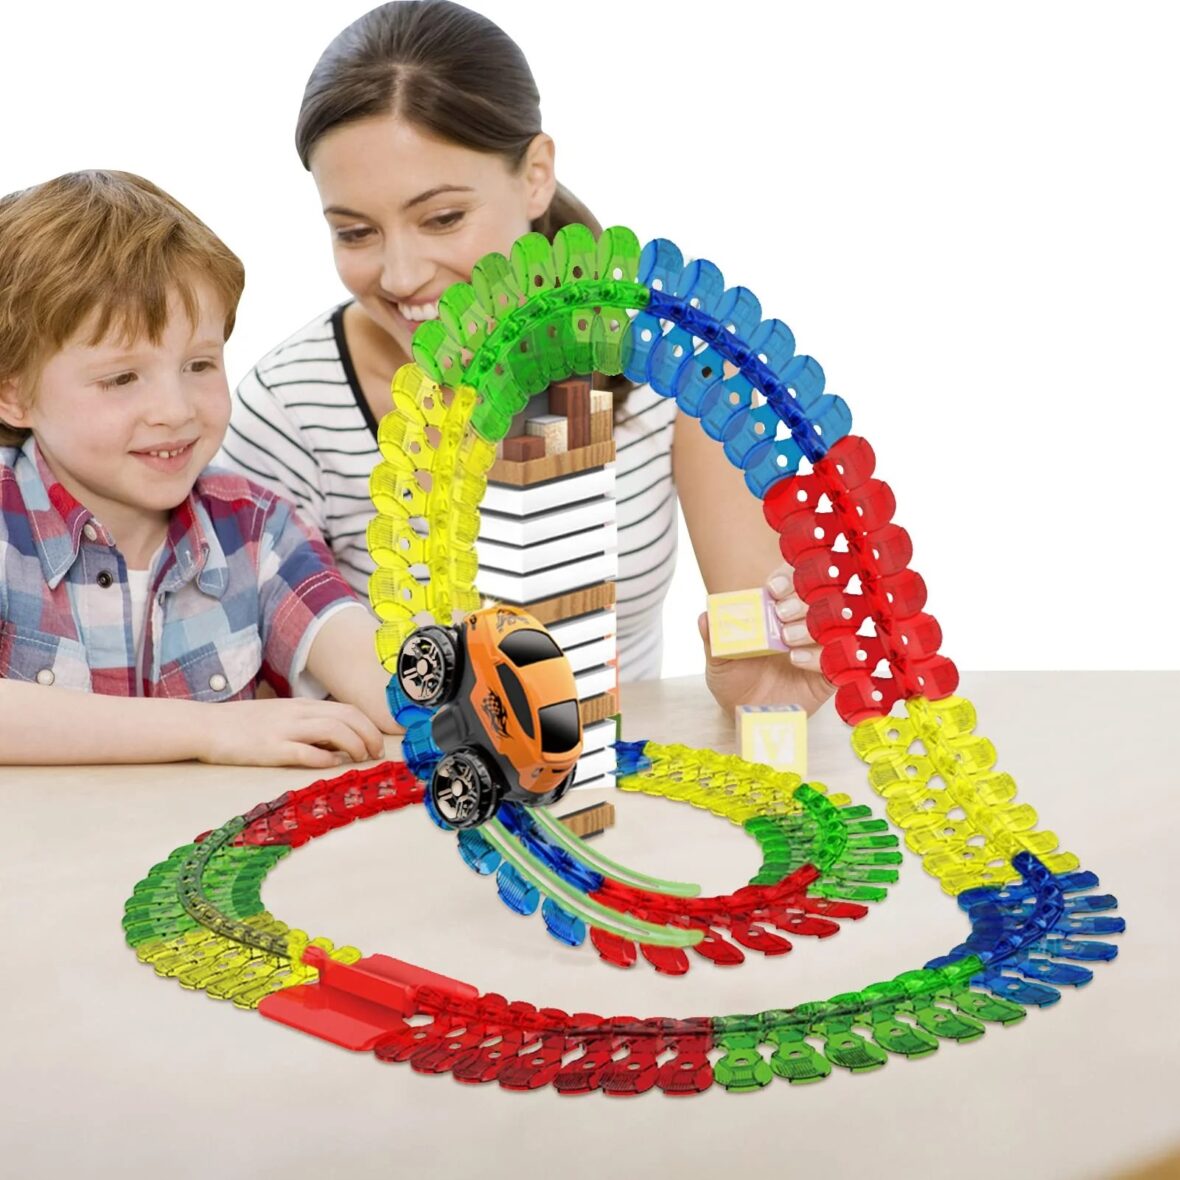 Anti-Gravity Puzzle Roller Coaster Toy.1